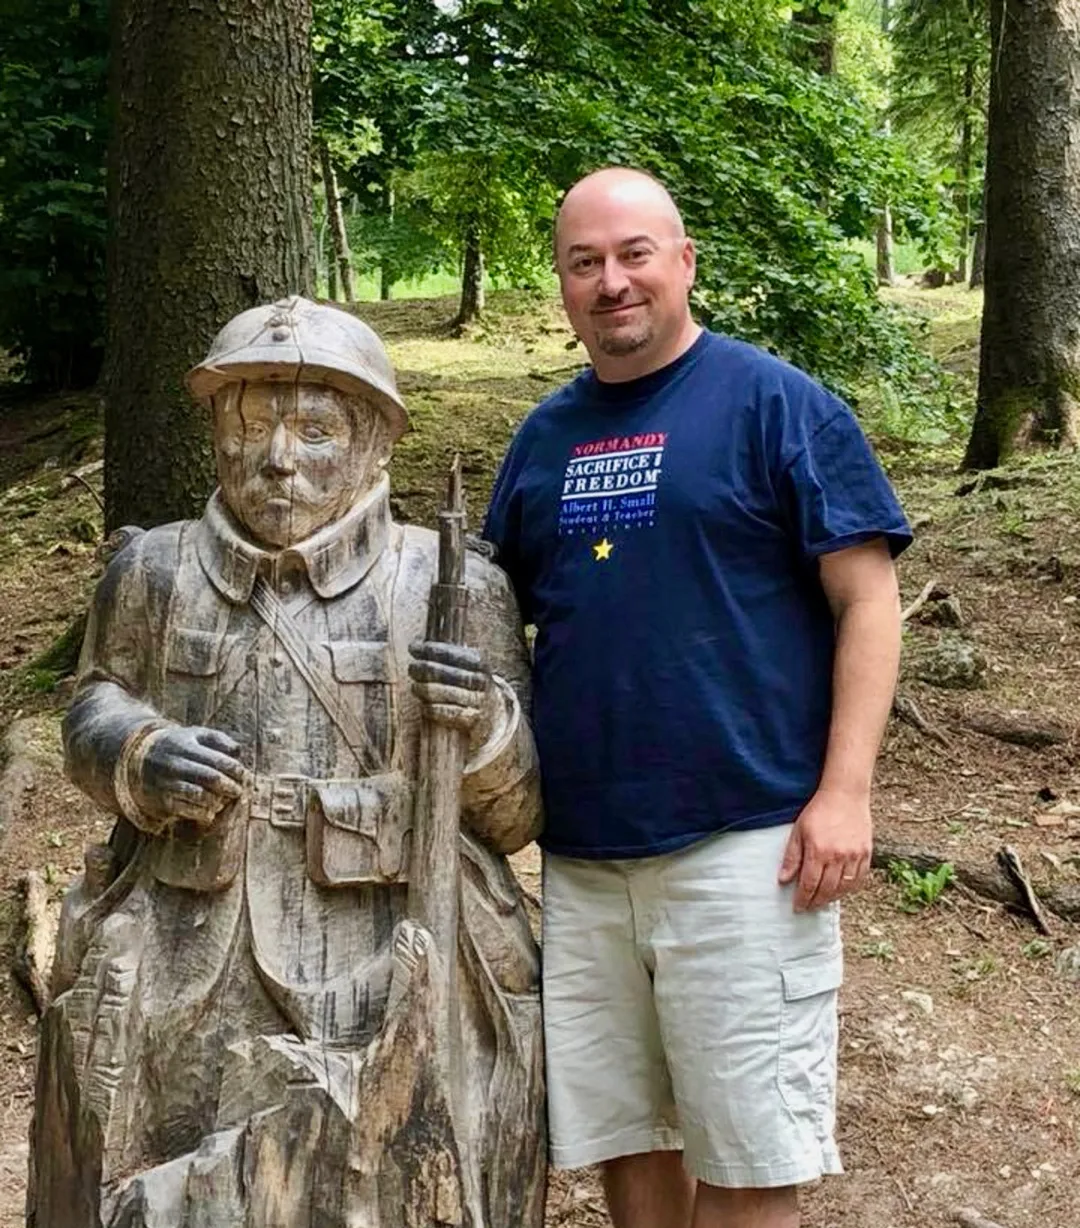 Teacher travel grants for History and Social Studies educators: 6 funded global education programs! In the destroyed village of Fleury near Verdun, France. The village was completely destroyed in the Battle of Verdun in 1916. Someone has carved a French poilu into a stump in the village.